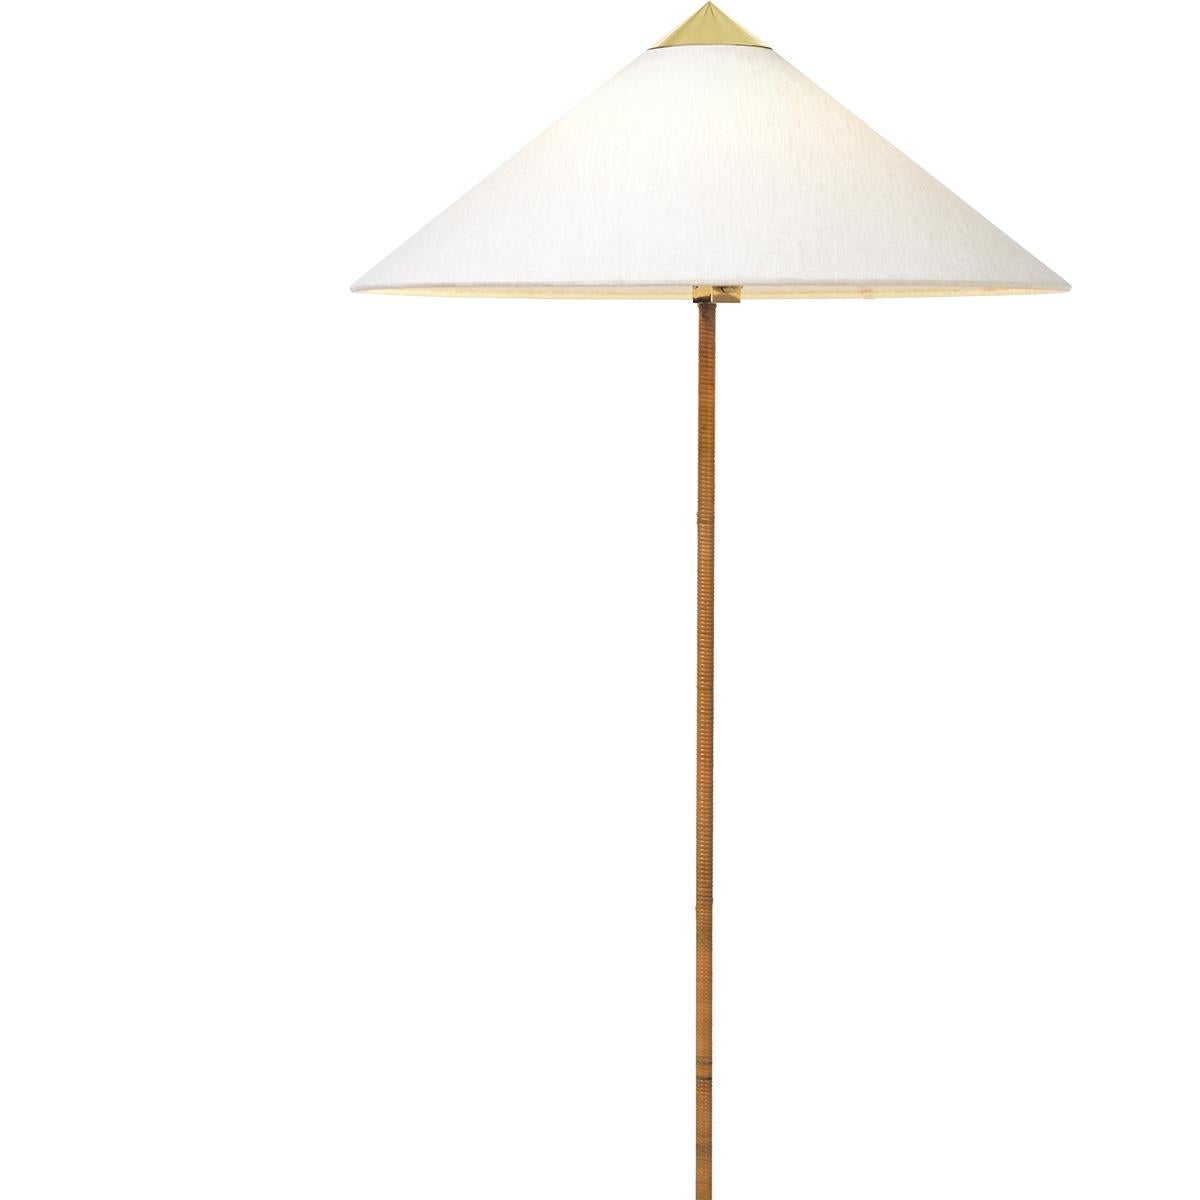 The 9602 Floor Lamp, also known as “Chinese Hat” was designed by Paavo Tynell in 1935 for the hotel Aulanko. Characterized by its elegant and airy lampshade and rattan-covered stem, the lamp shows the designer’s limitless imagination and